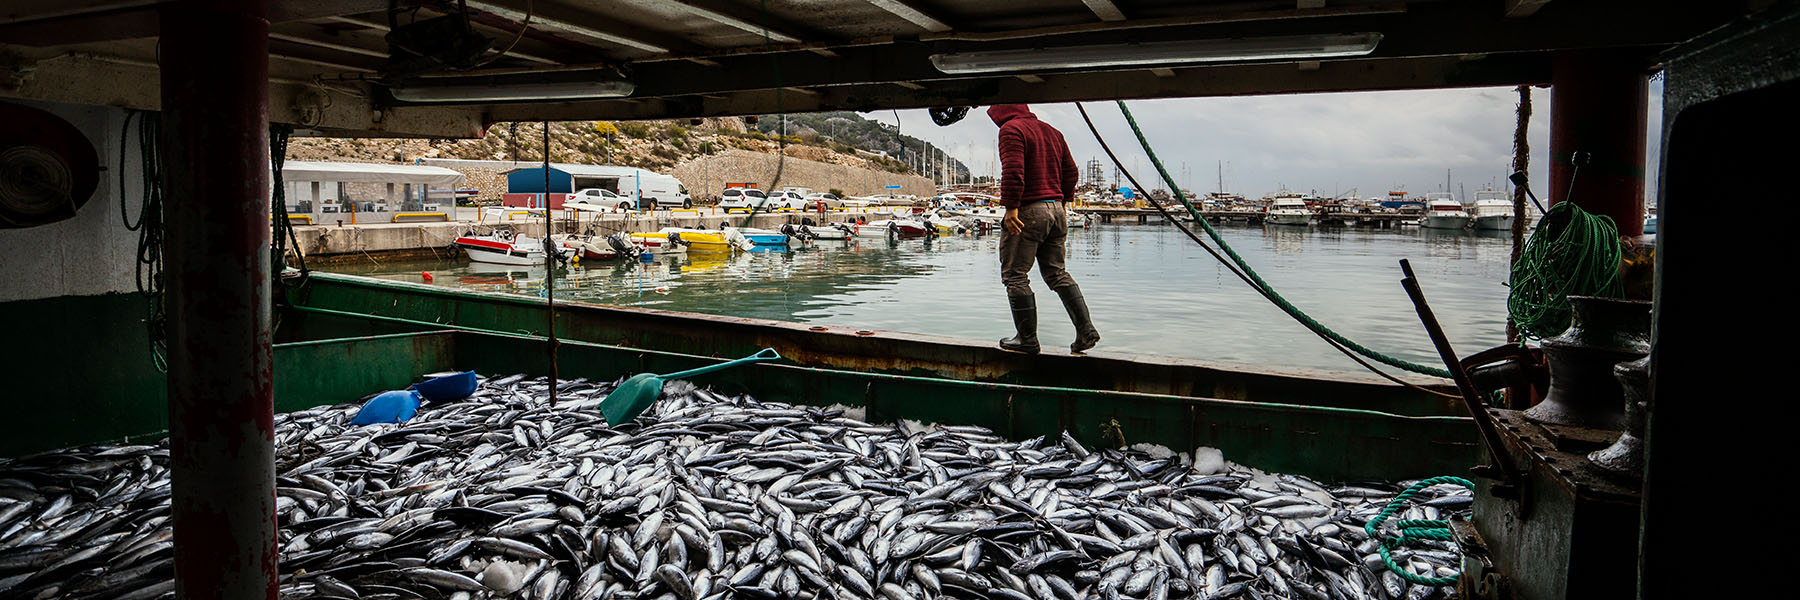 Human Trafficking in the Fishing Industry